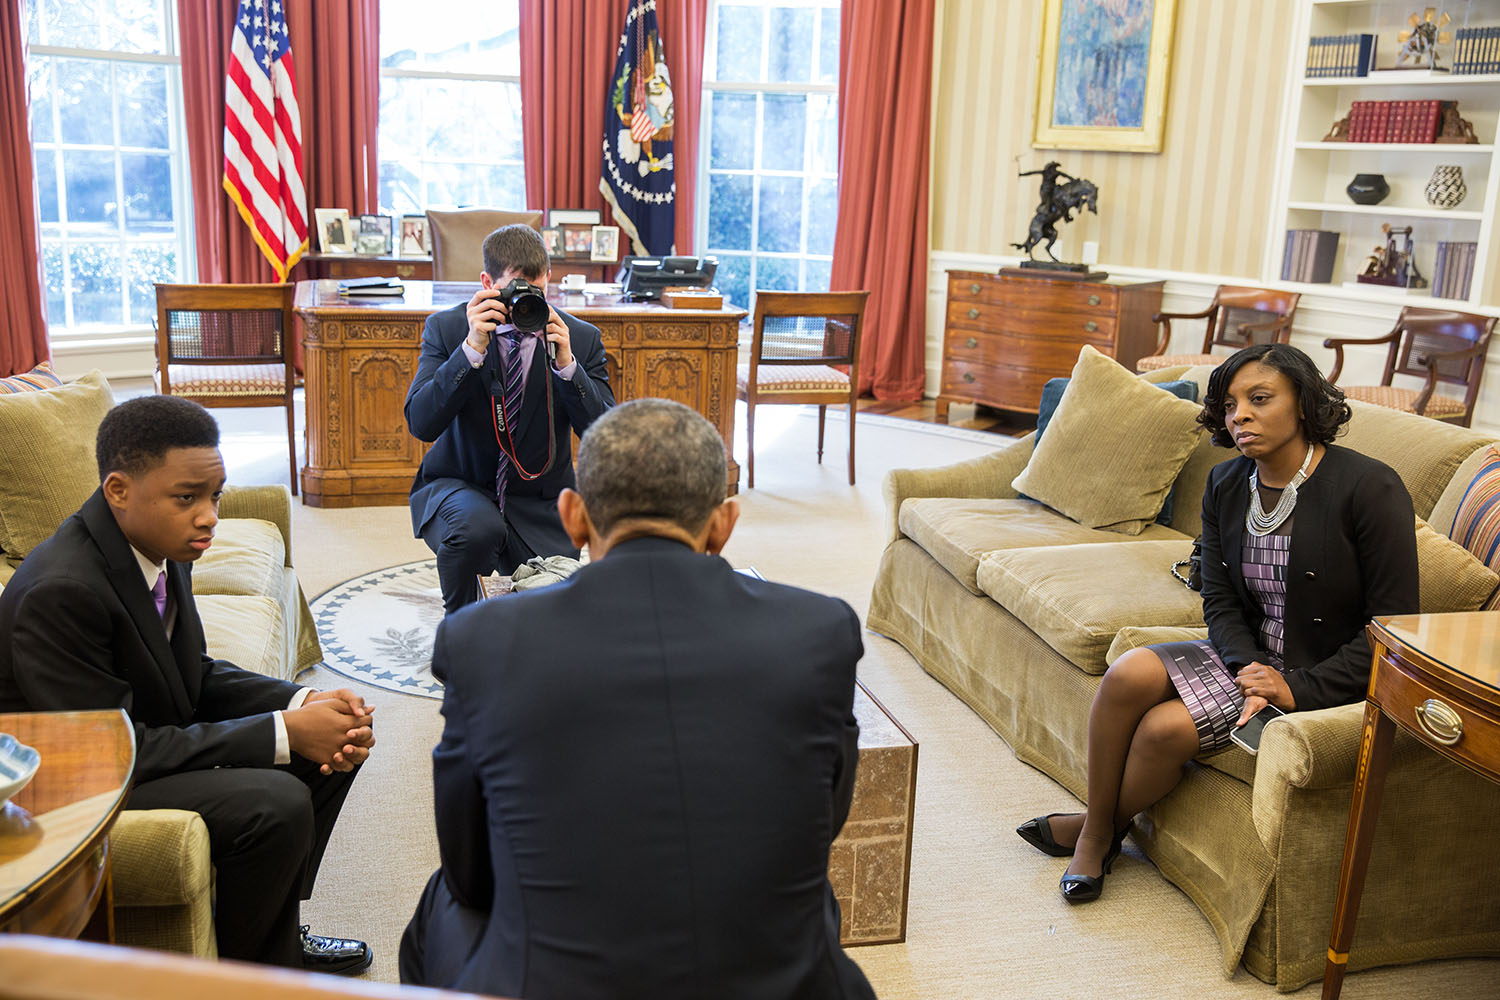 President Obama meets with Vidal and Nadia for 